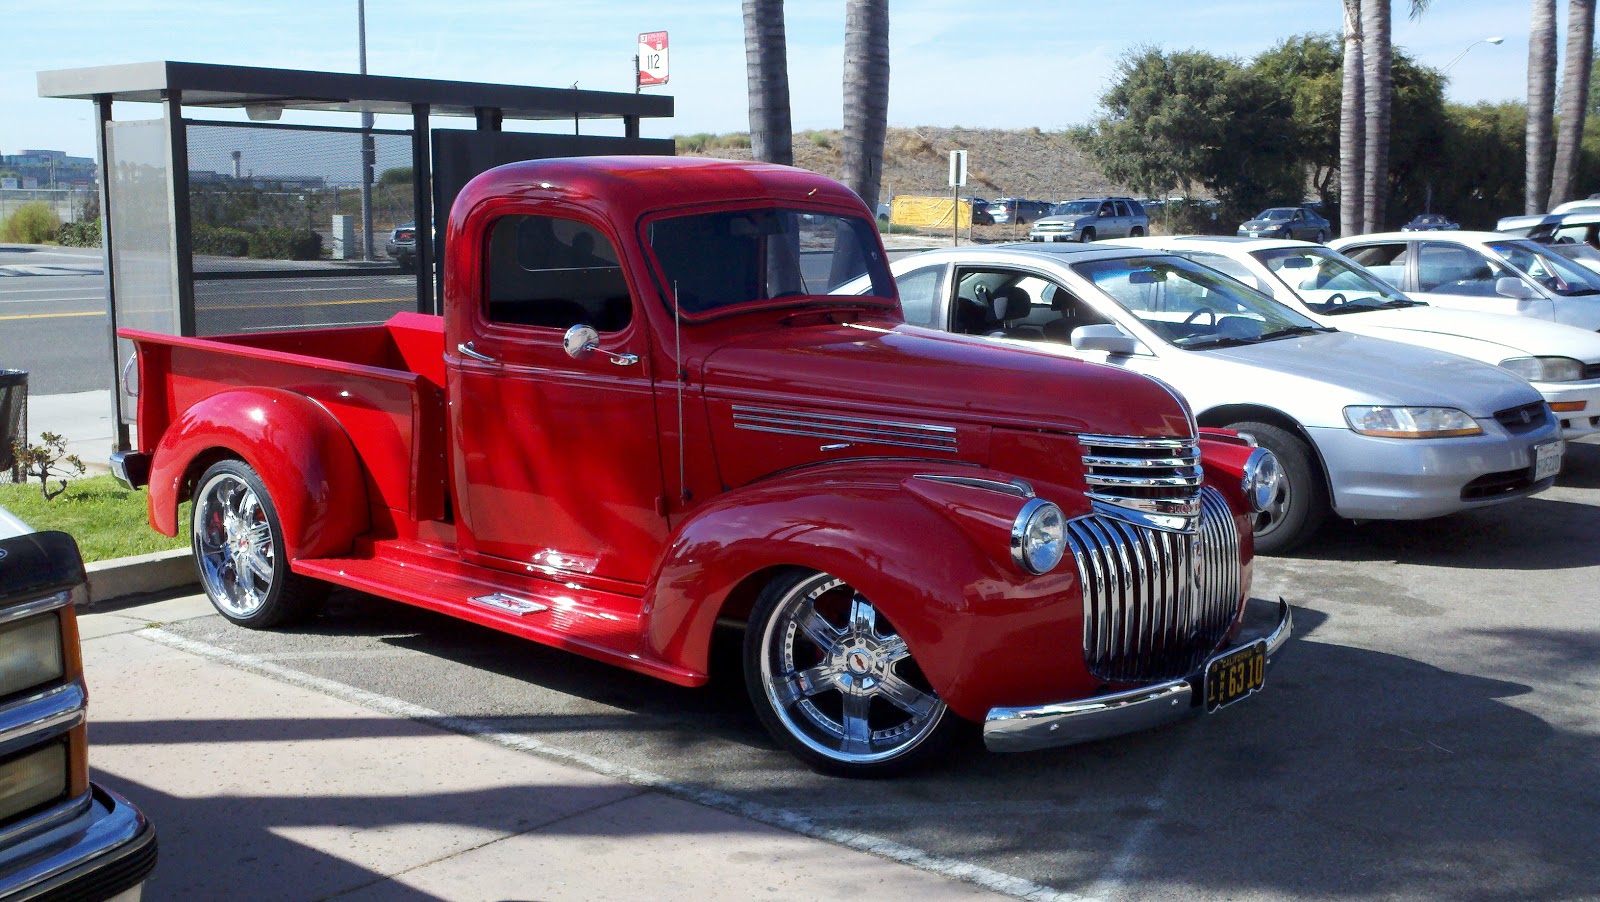 Every Blade of Grass 1941 Chevrolet PickUp Truck